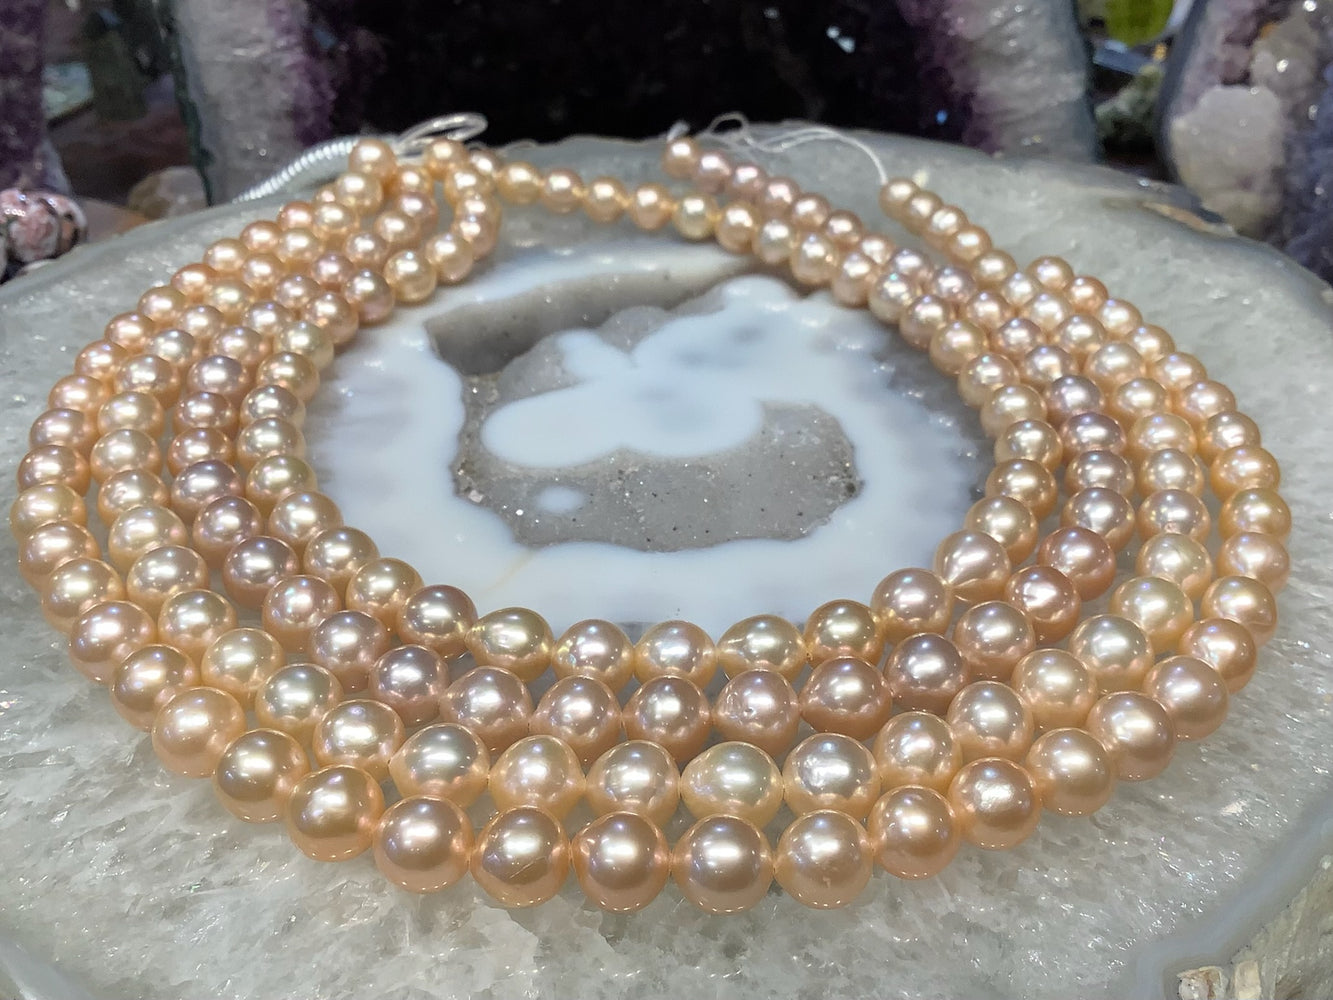 Stunning Natural Champagne Cream Nucleus Freshwater Pearls - Amazing Luster (10mm)